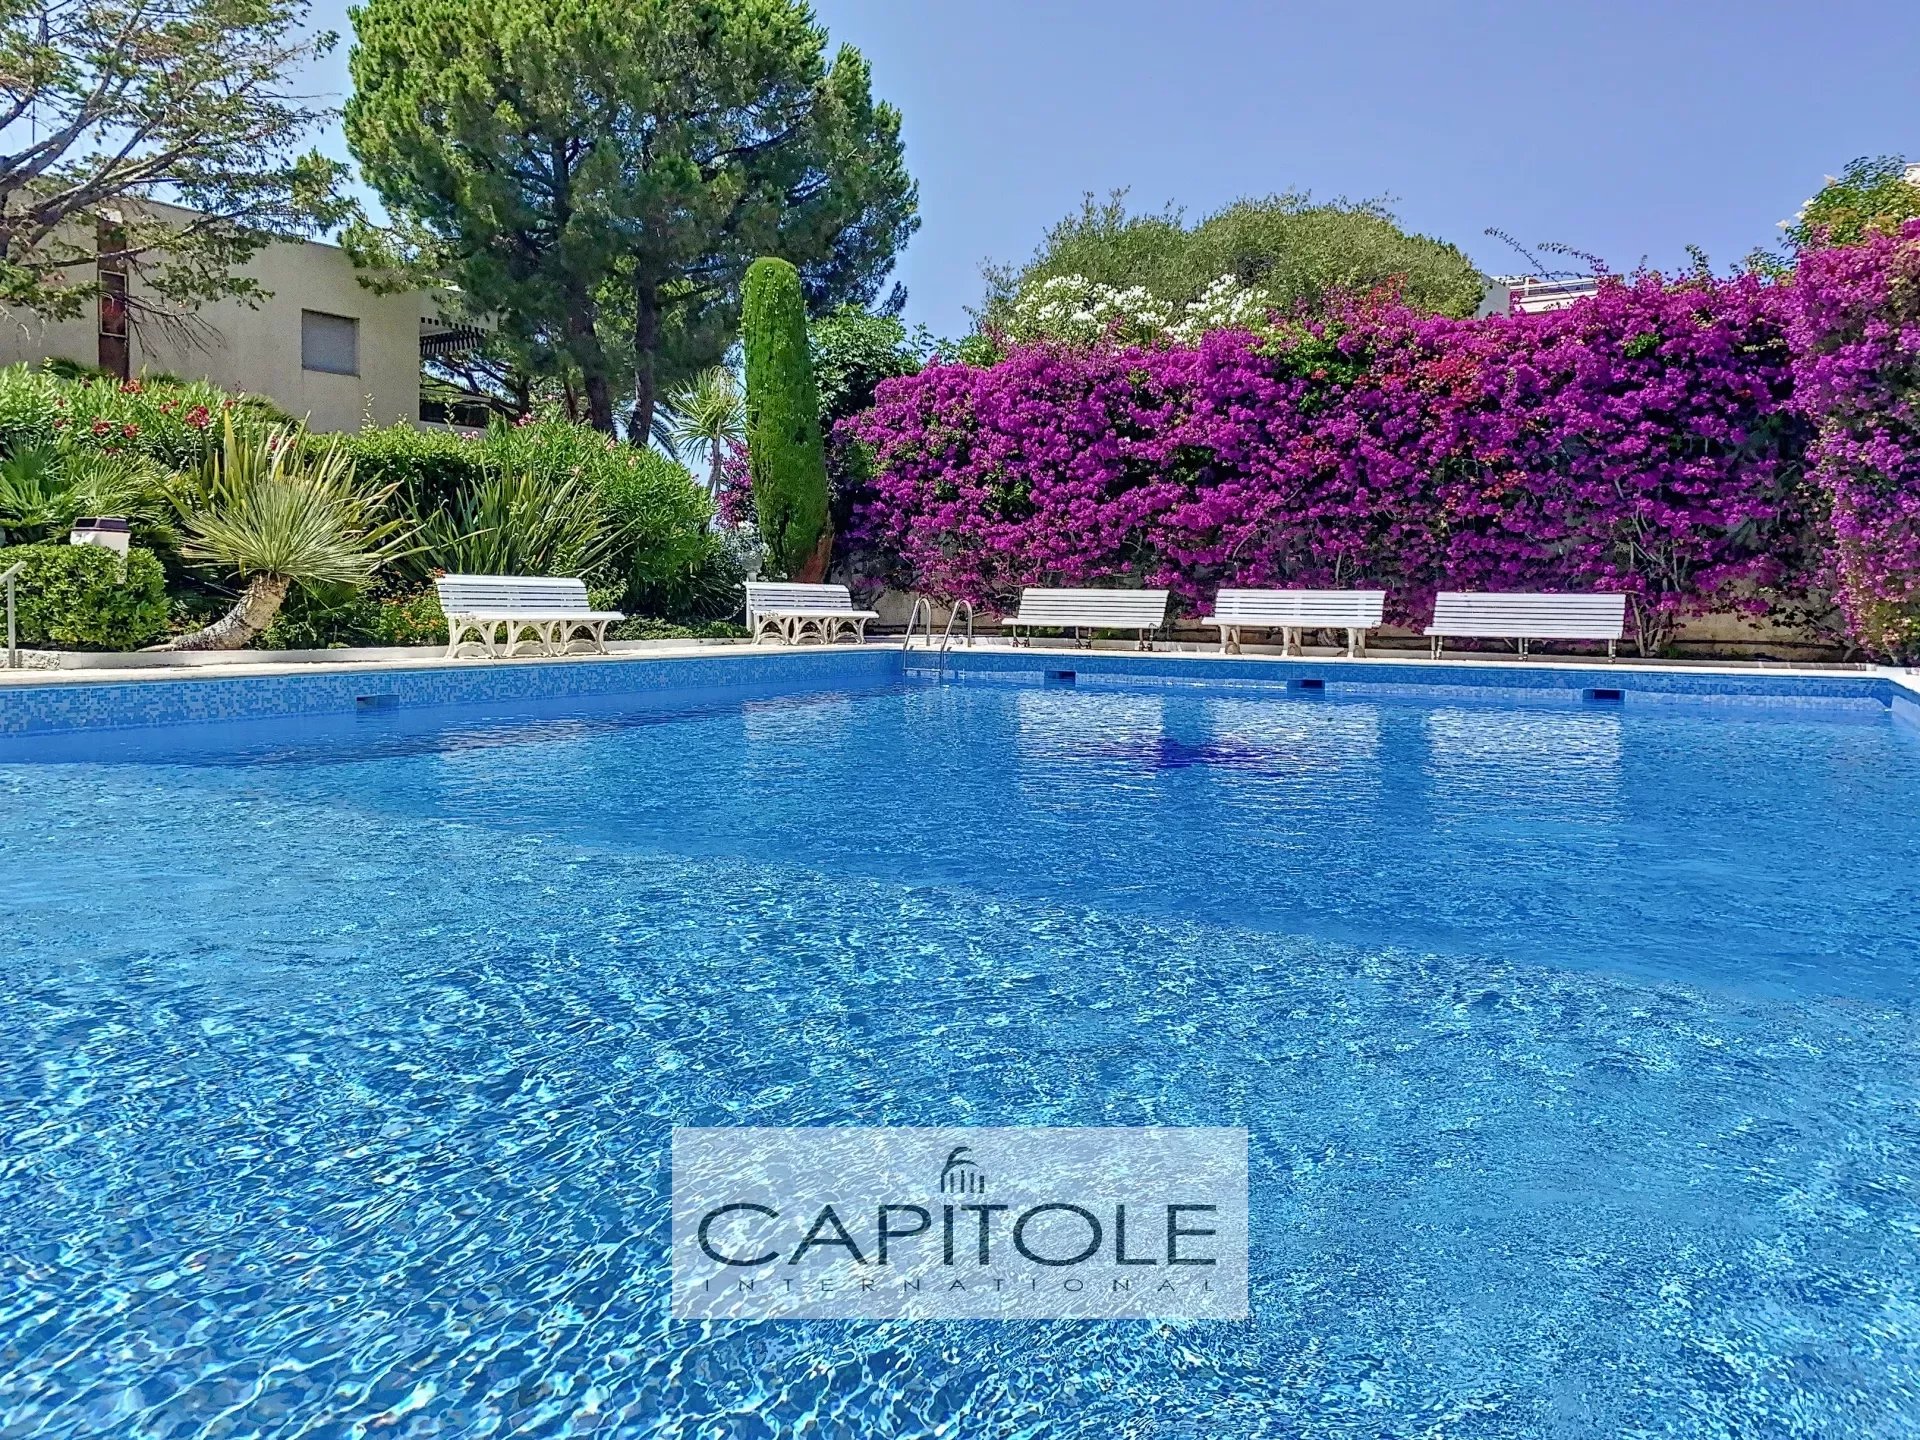 SOLE AGENT PROPERTY - ANTIBES -  For sale 2-bedroom apartment, terrace of 20 sqm, swimming pool, cellar, garage